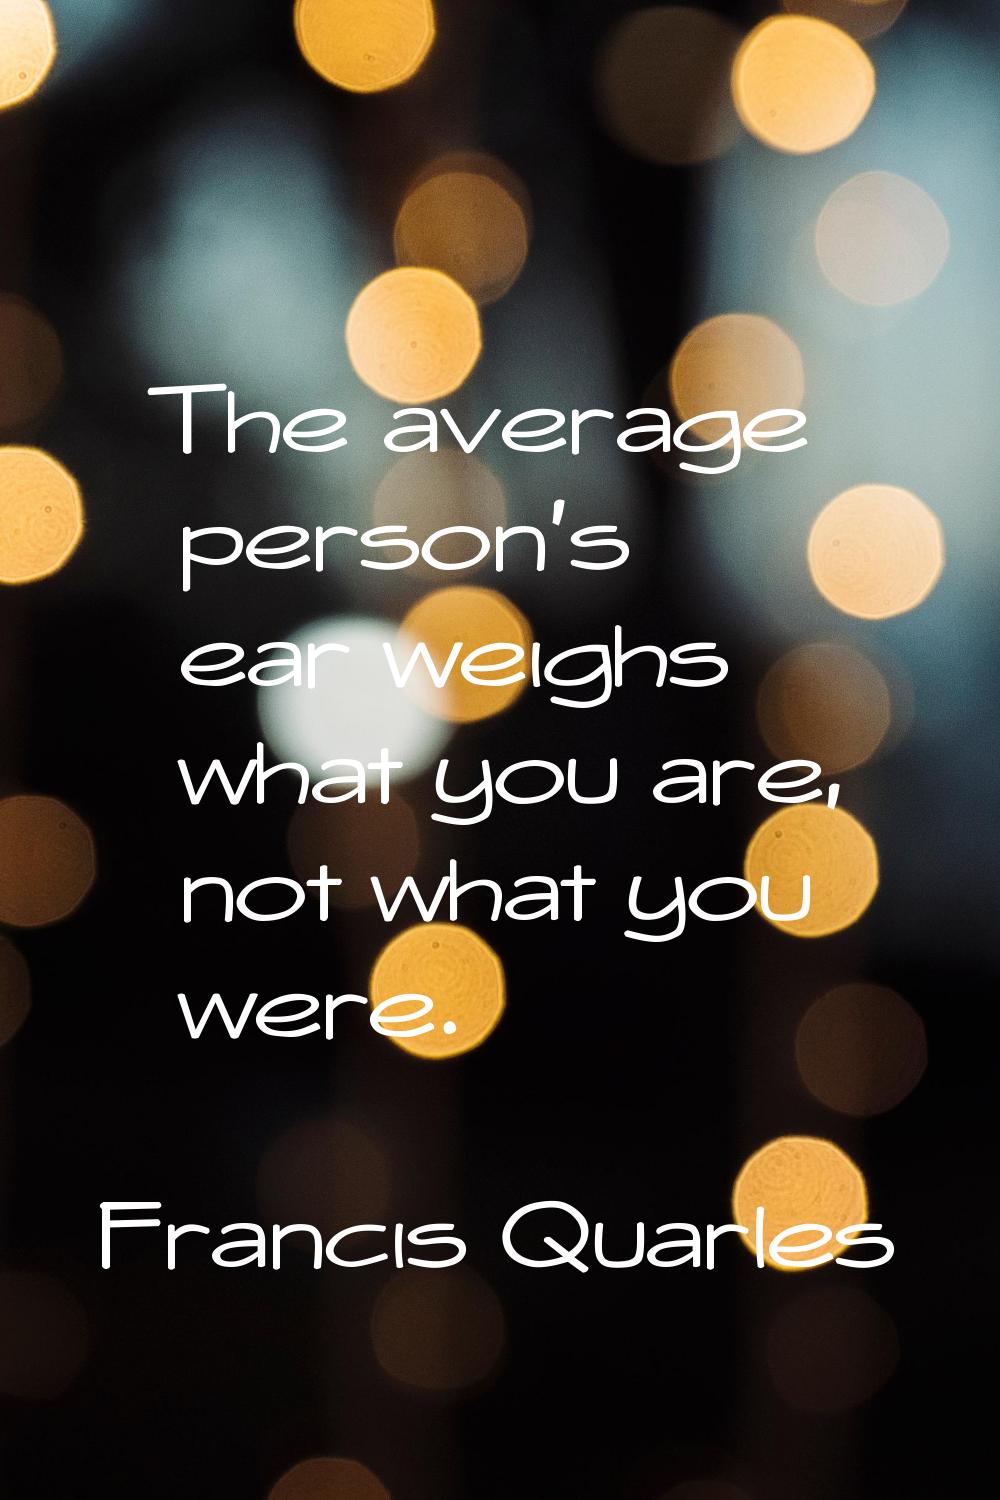 The average person's ear weighs what you are, not what you were.